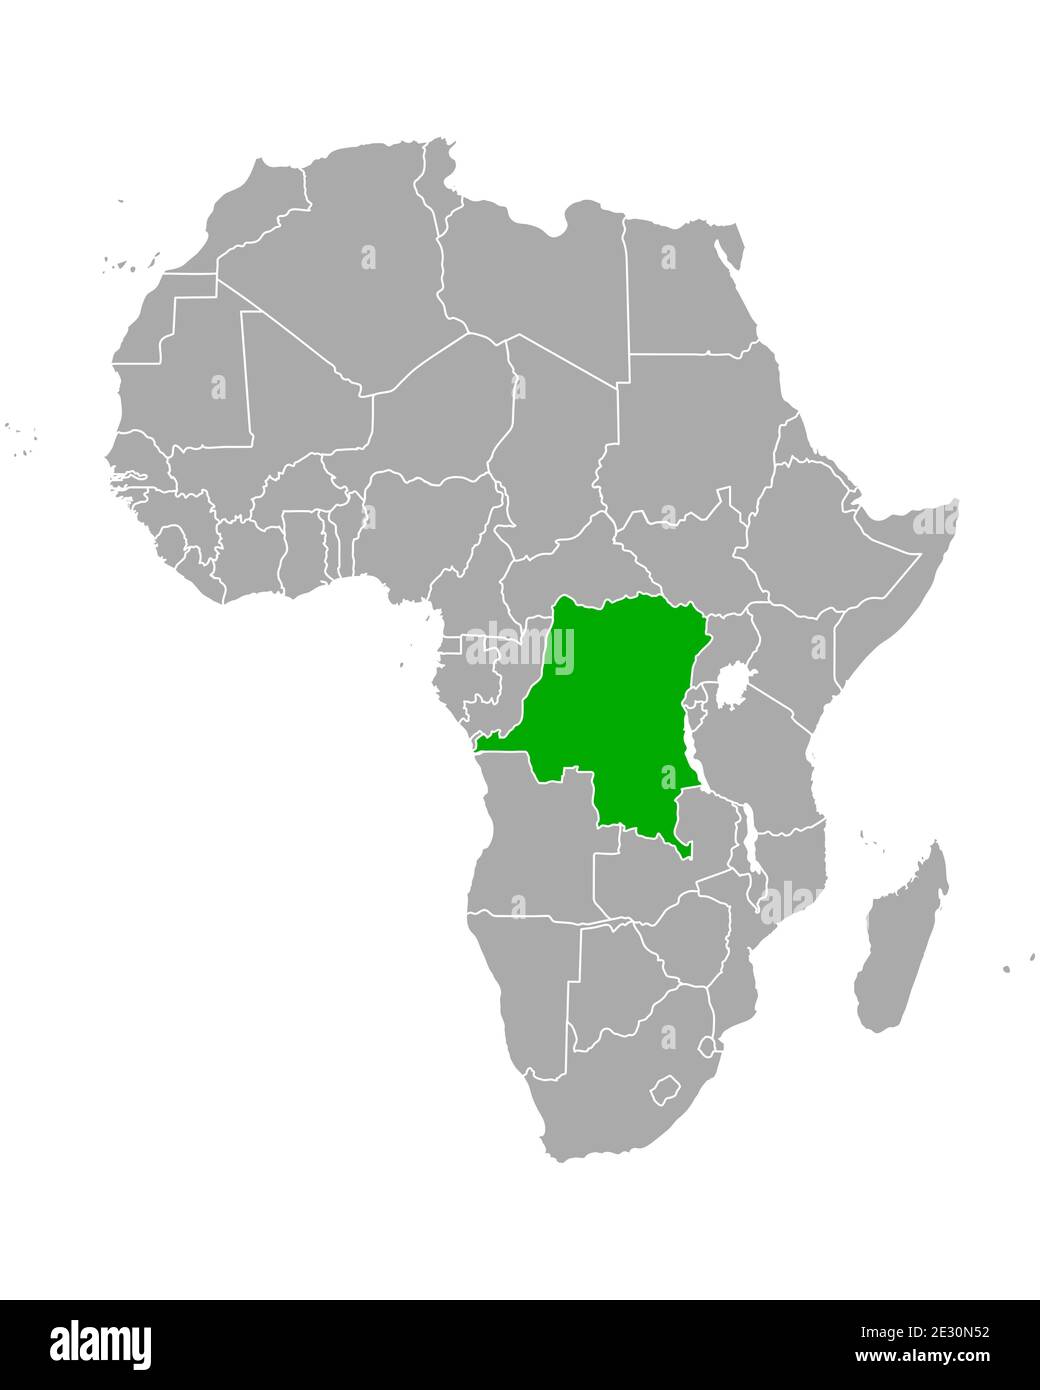 Map of Democratic Republic of the Congo in Africa Stock Photo